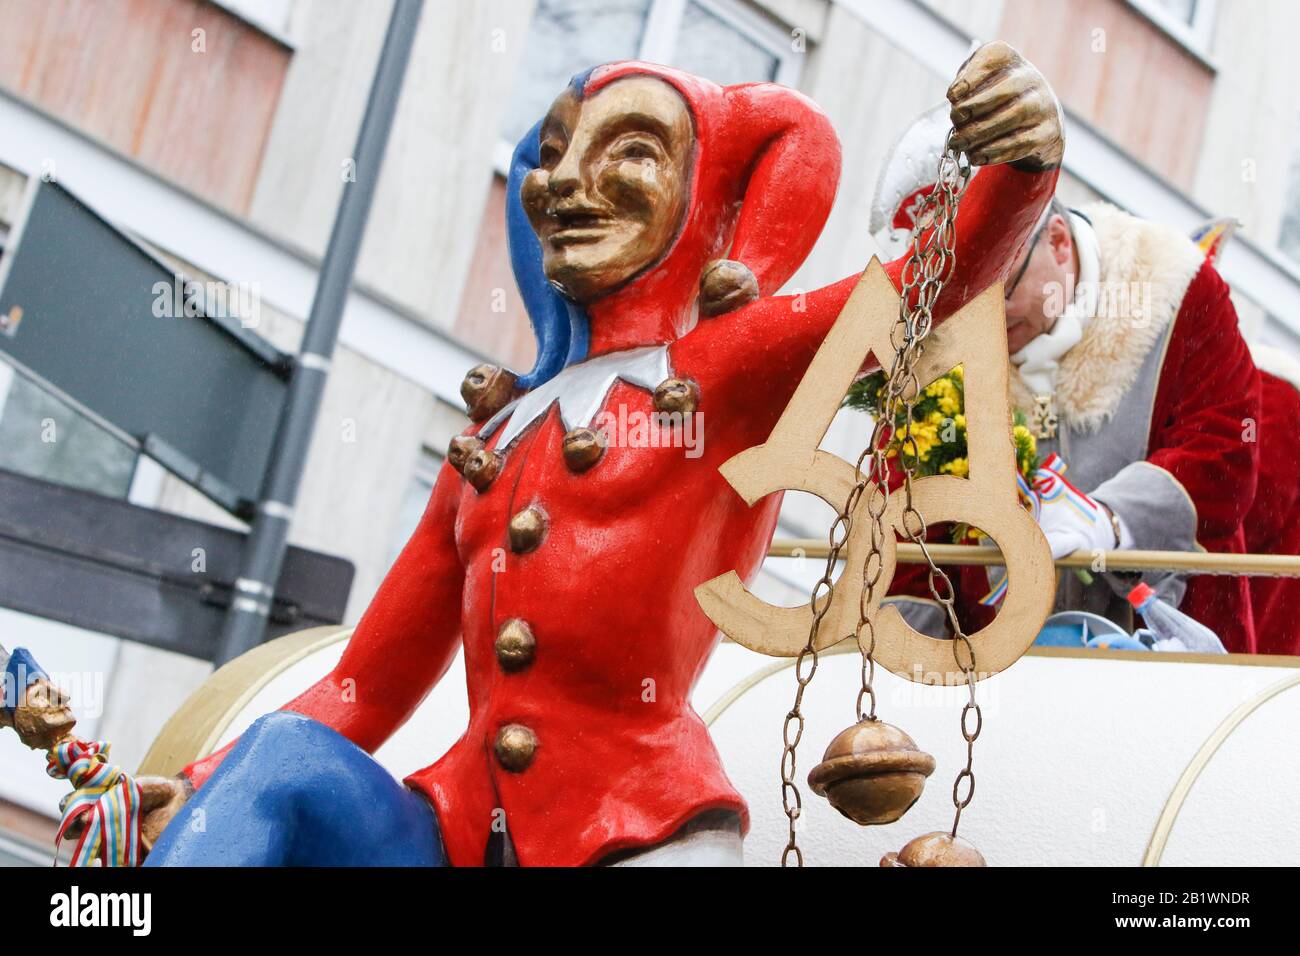 Mainz, Germany. 24th February 2020. A jester figure sits on a float from the Mainzer Carneval Club in the Mainz Rose Monday parade. Around half a million people lined the streets of Mainz for the traditional Rose Monday Carnival Parade. The 9 km long parade with over 9,000 participants is one of the three large Rose Monday Parades in Germany. Stock Photo